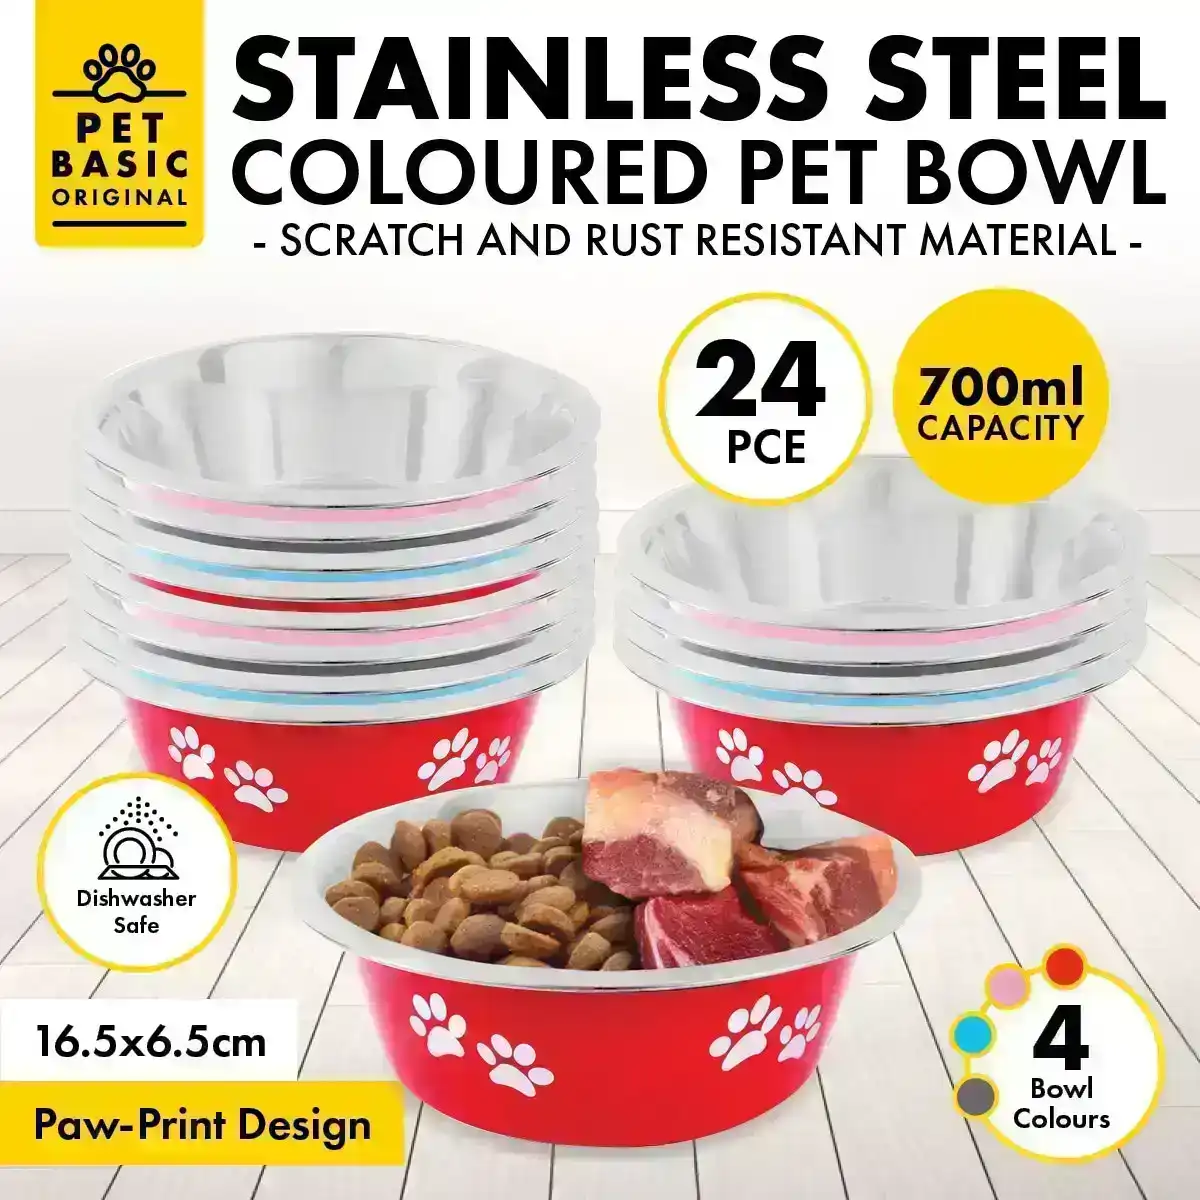 Pet Basic® 24PCE Pet Bowl 16.5cm Stainless Steel Coloured With Paw Print 700ml